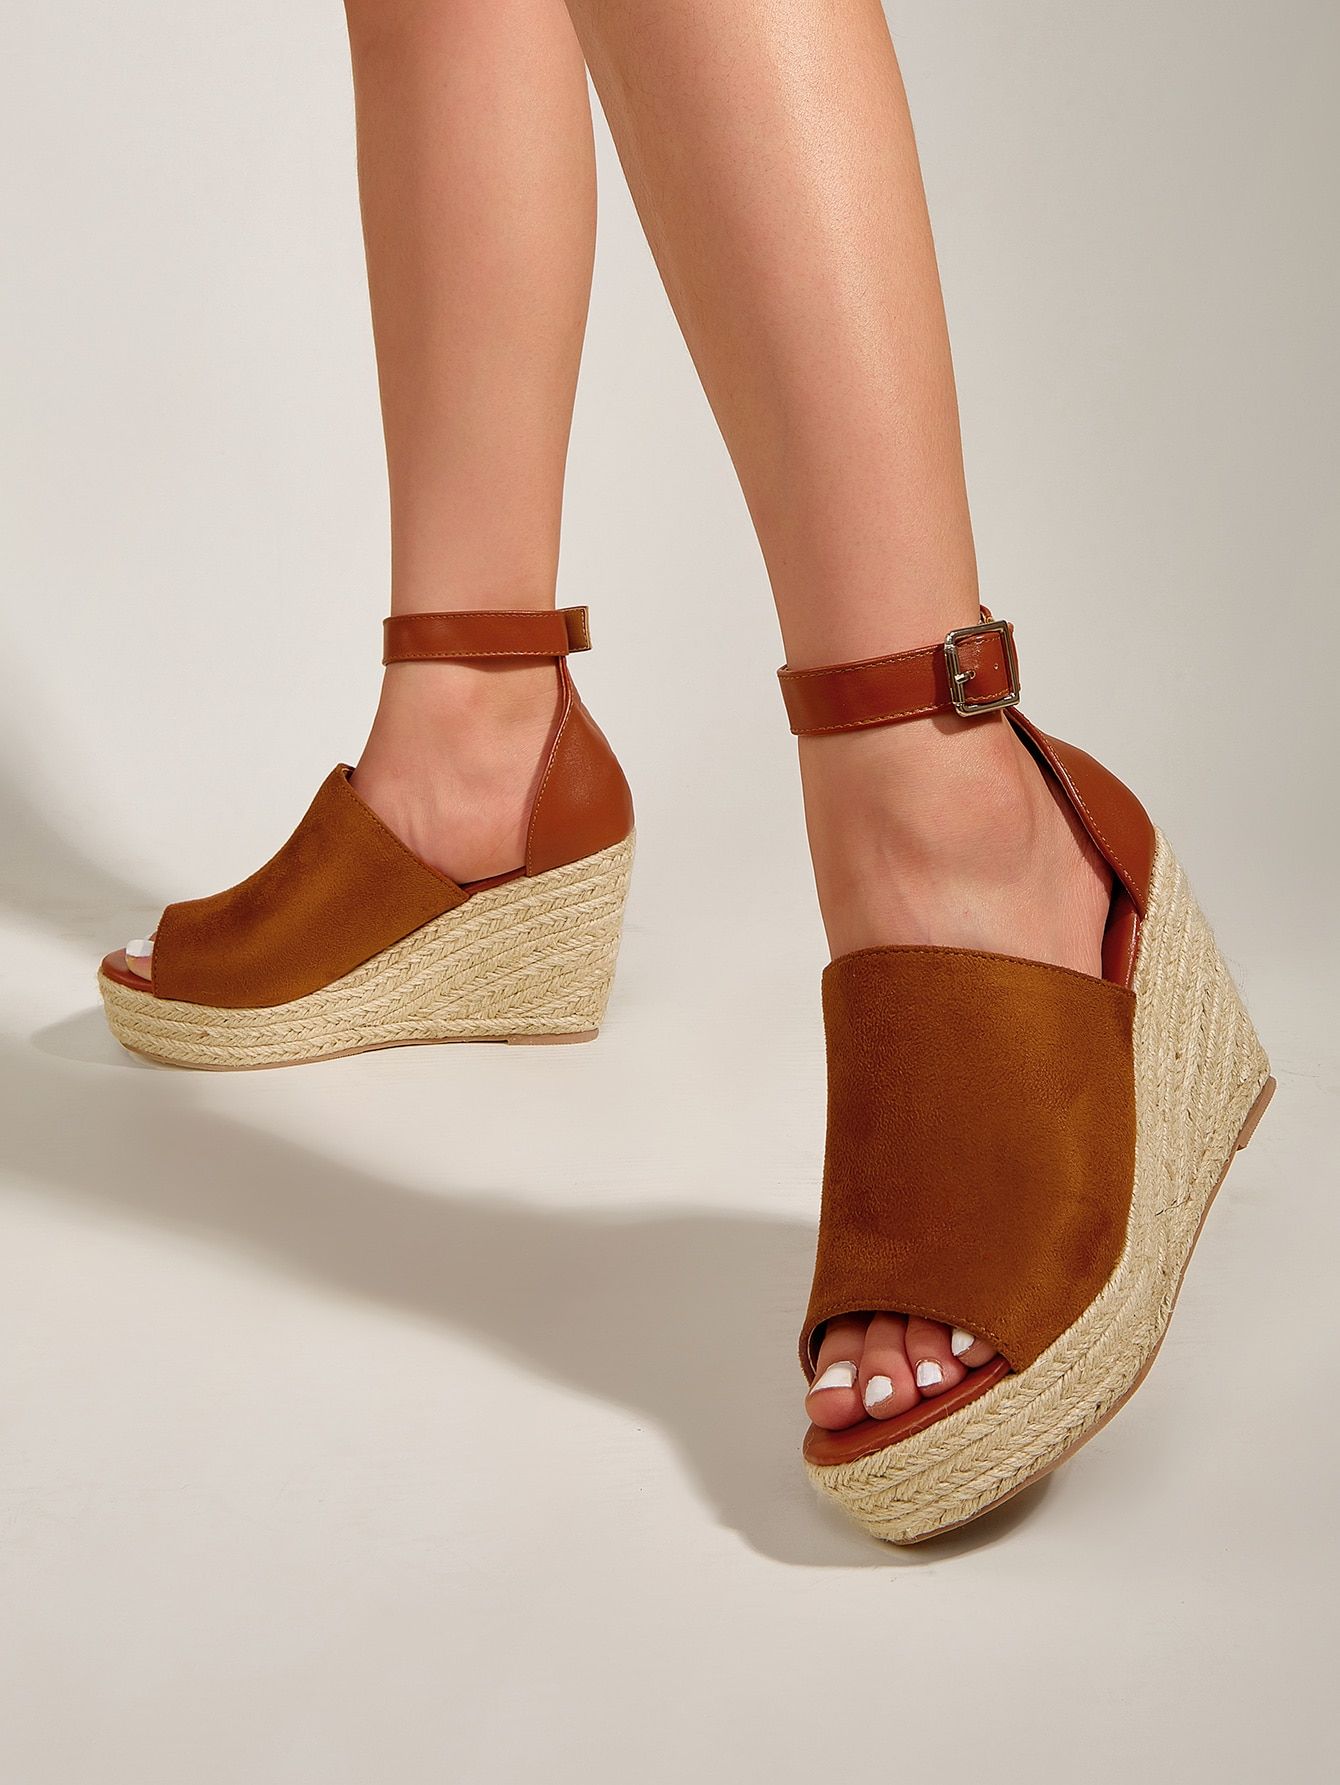 Open Toe Ankle Strap Espadrille Wedge Sandals | SHEIN